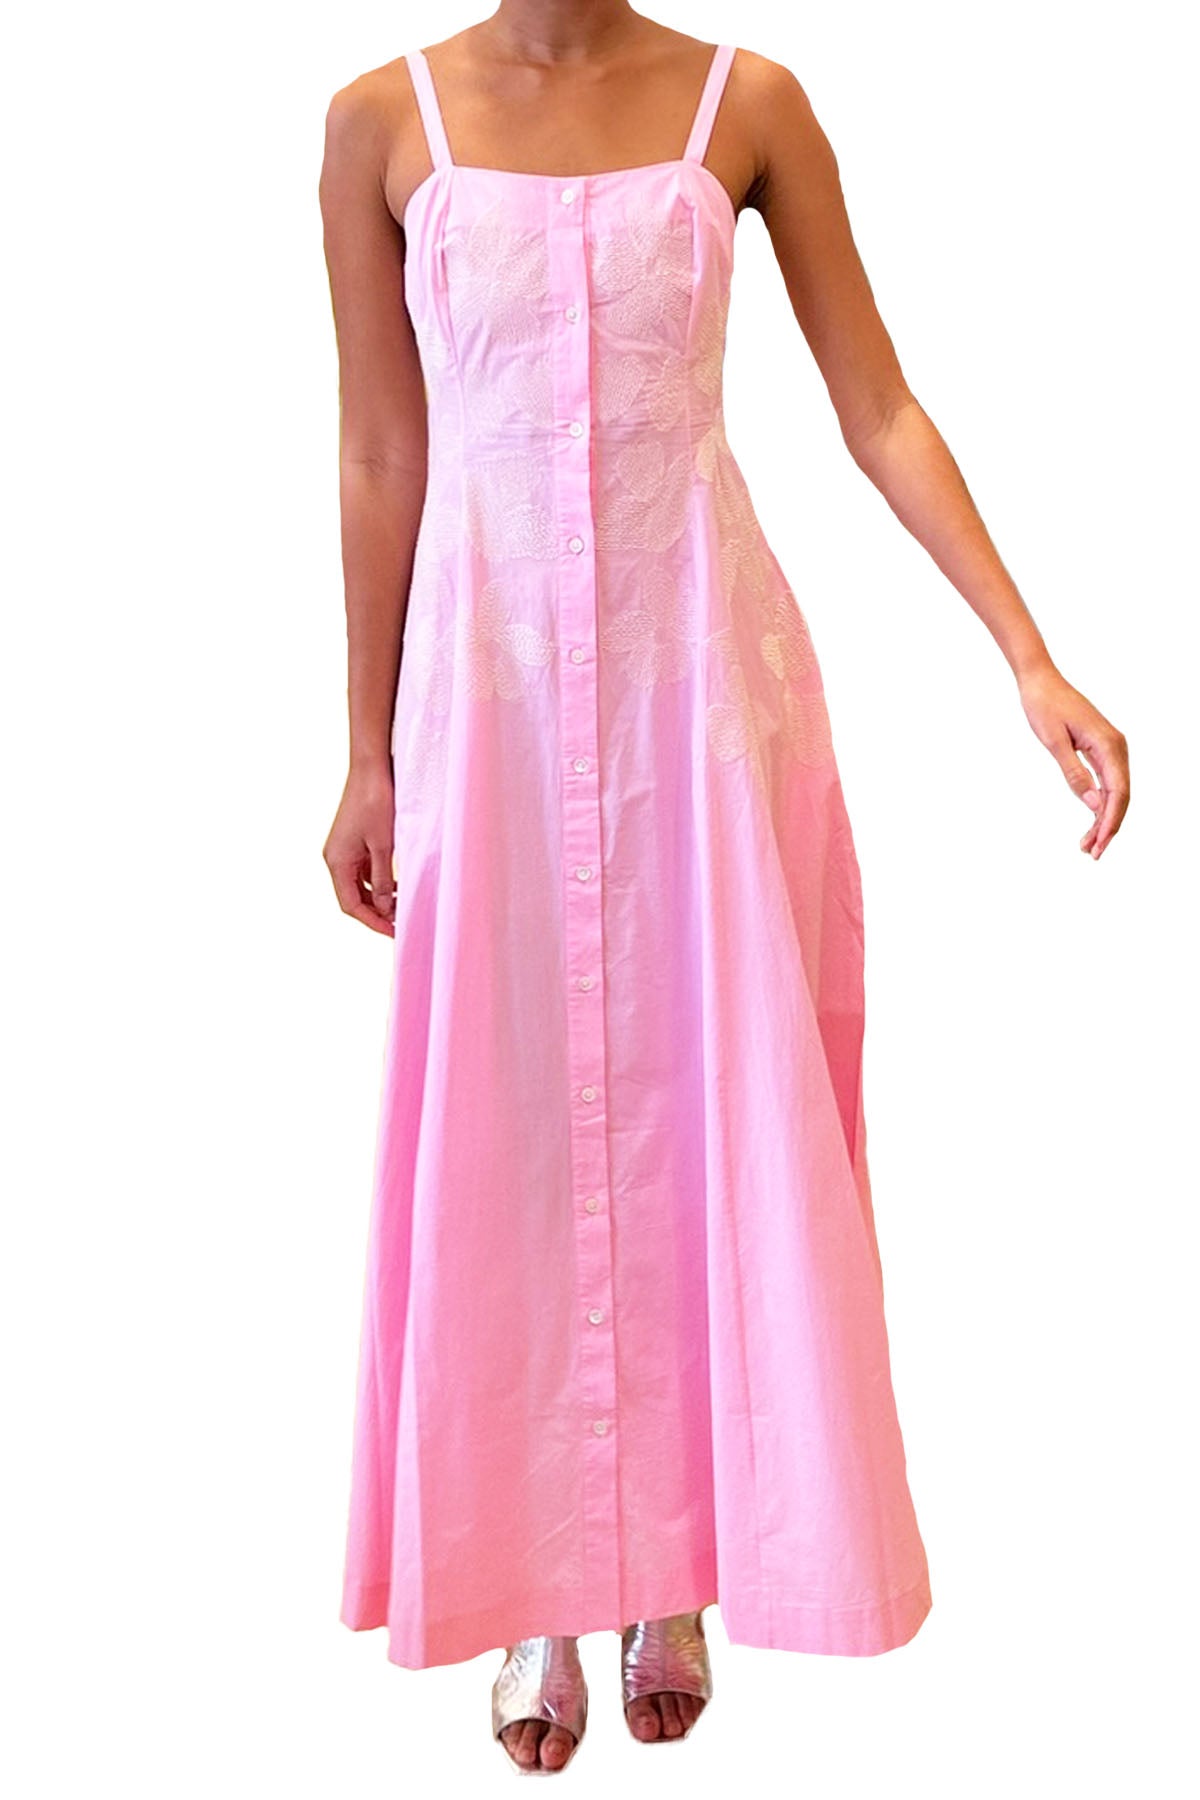 dress tiphaine - pink